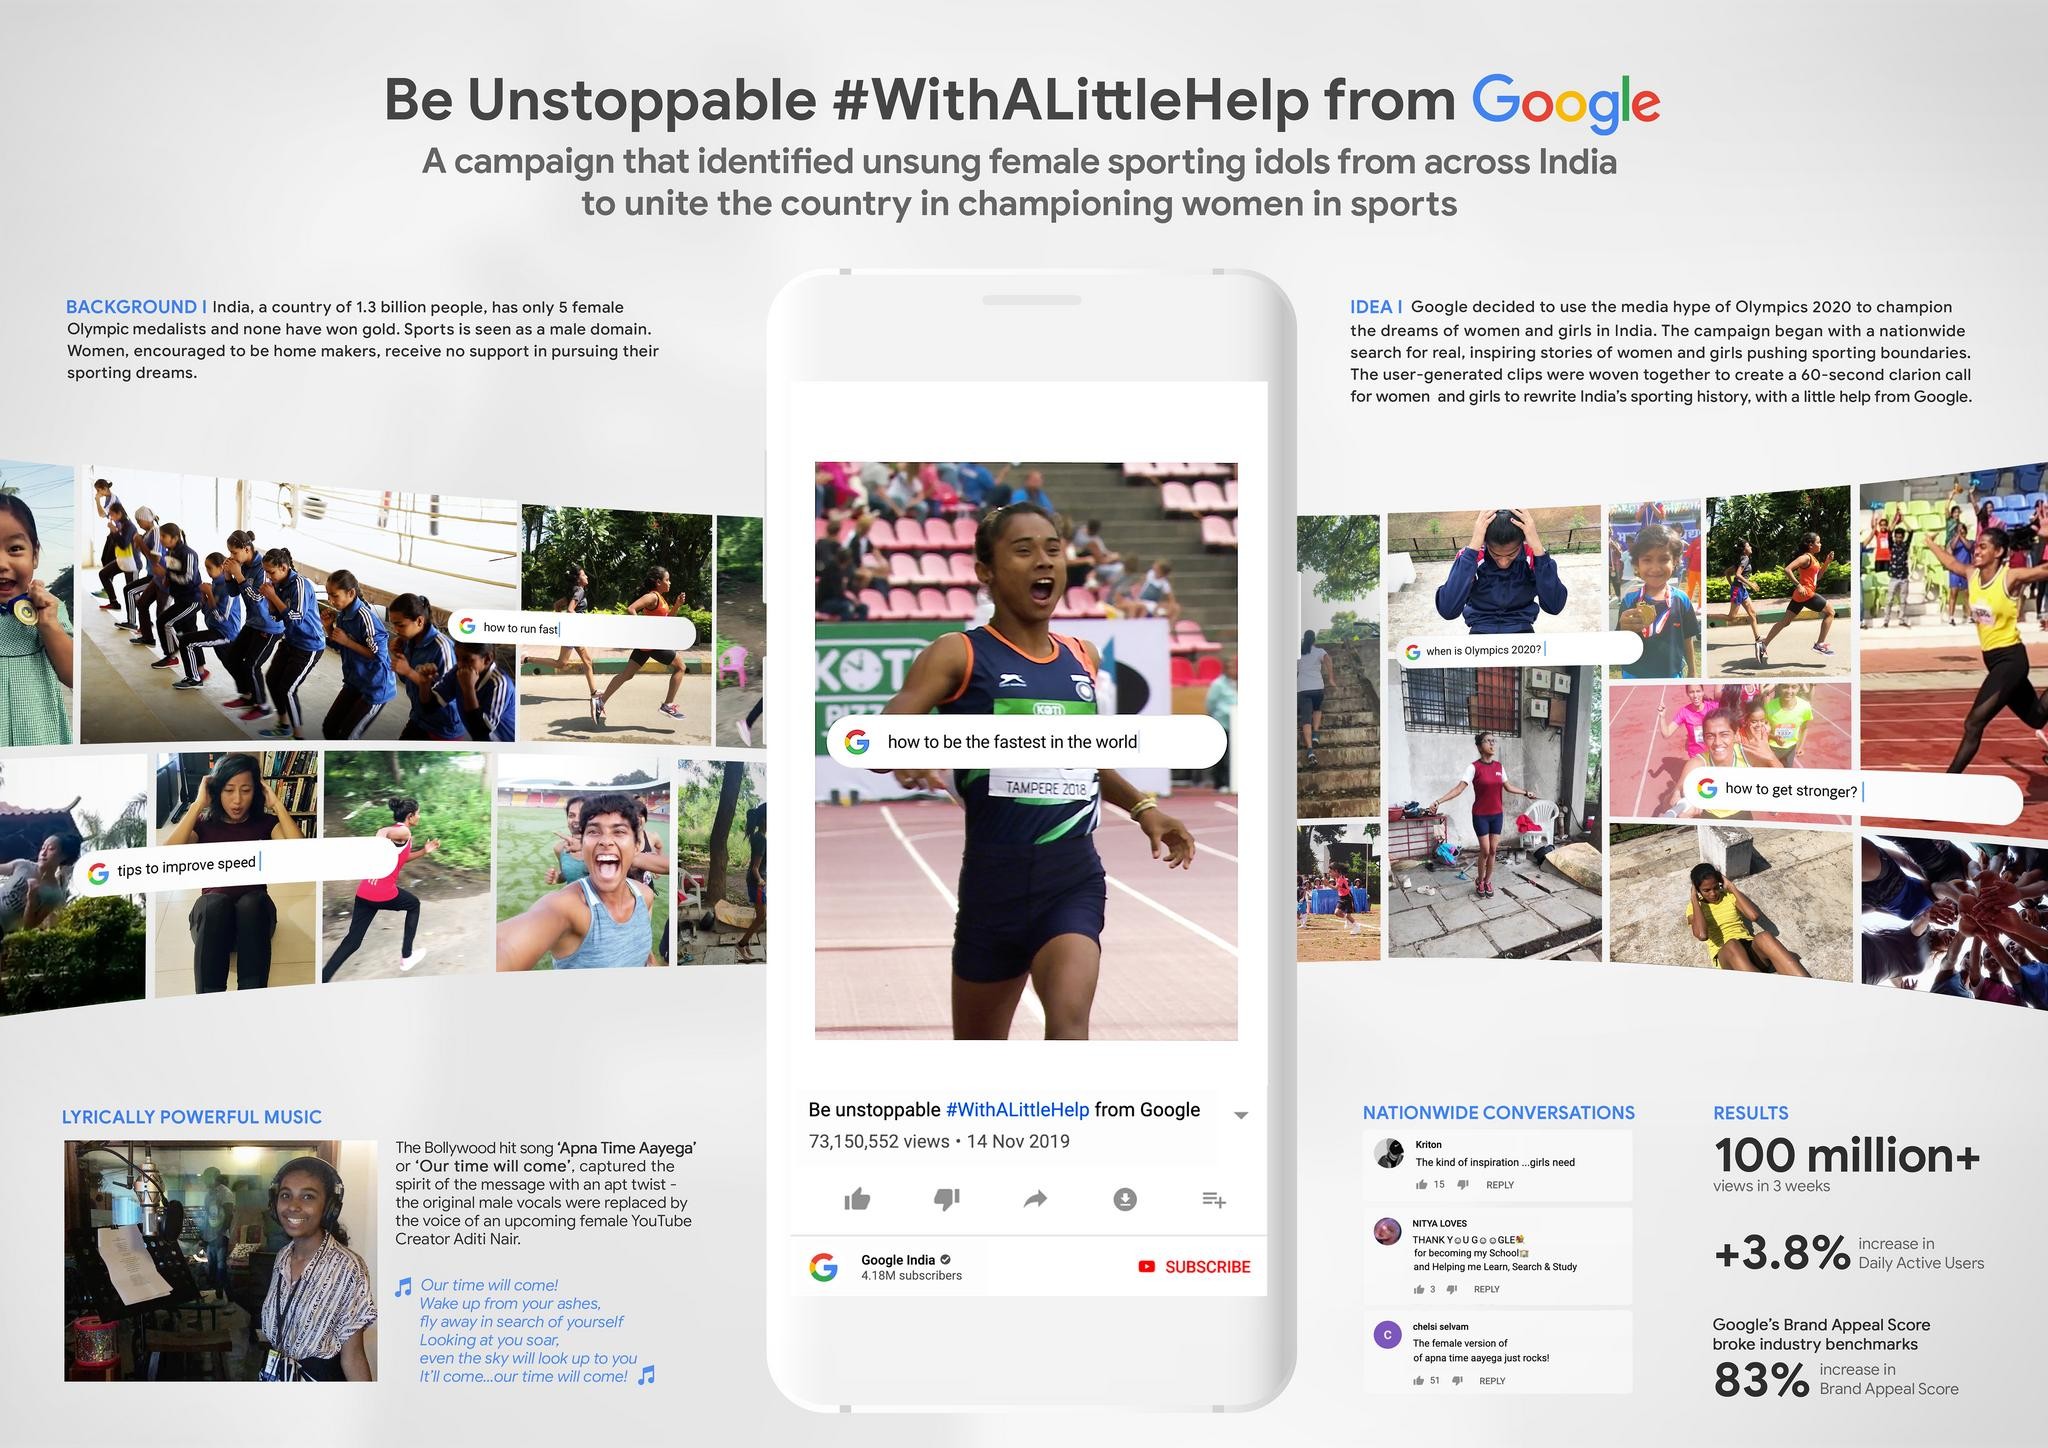 Be Unstoppable #WithALittleHelp from Google